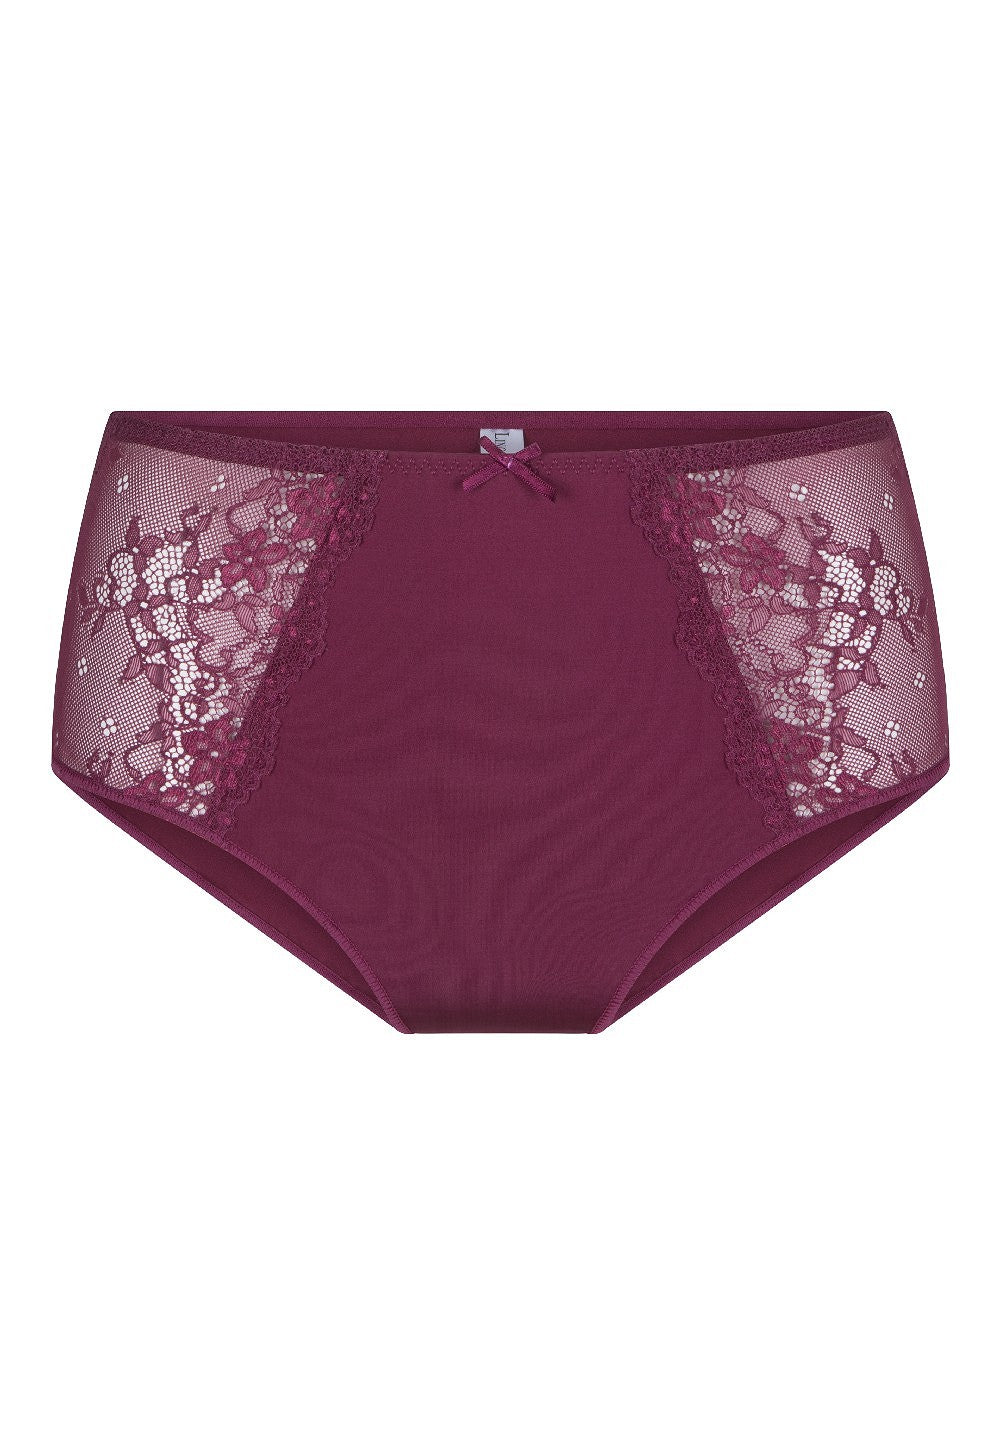 LingaDore Daily Collection High Waist Brief - Tawny Port